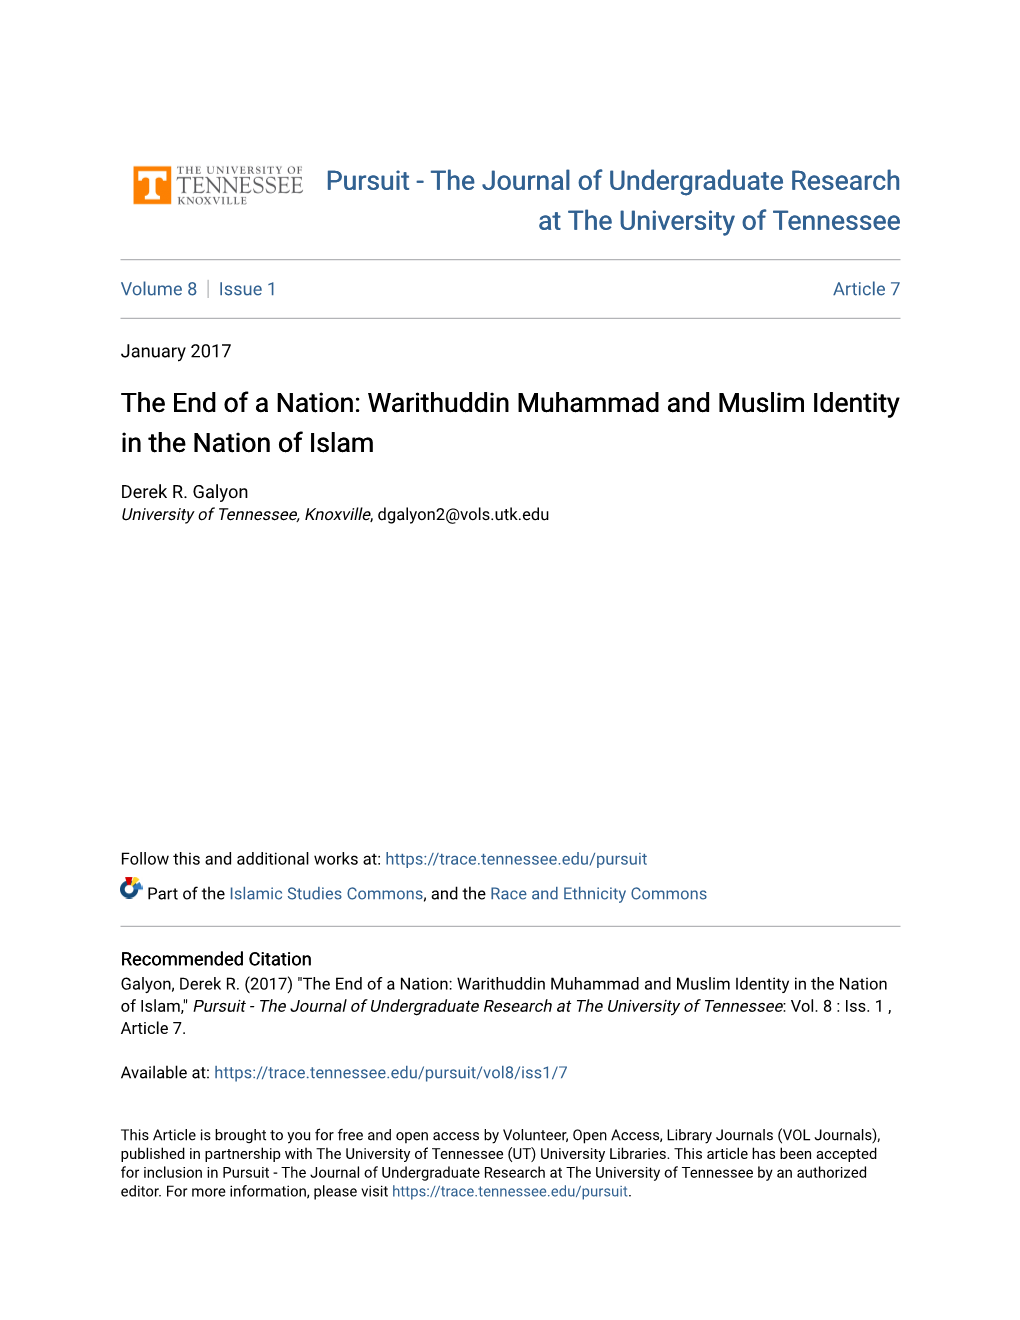 Warithuddin Muhammad and Muslim Identity in the Nation of Islam